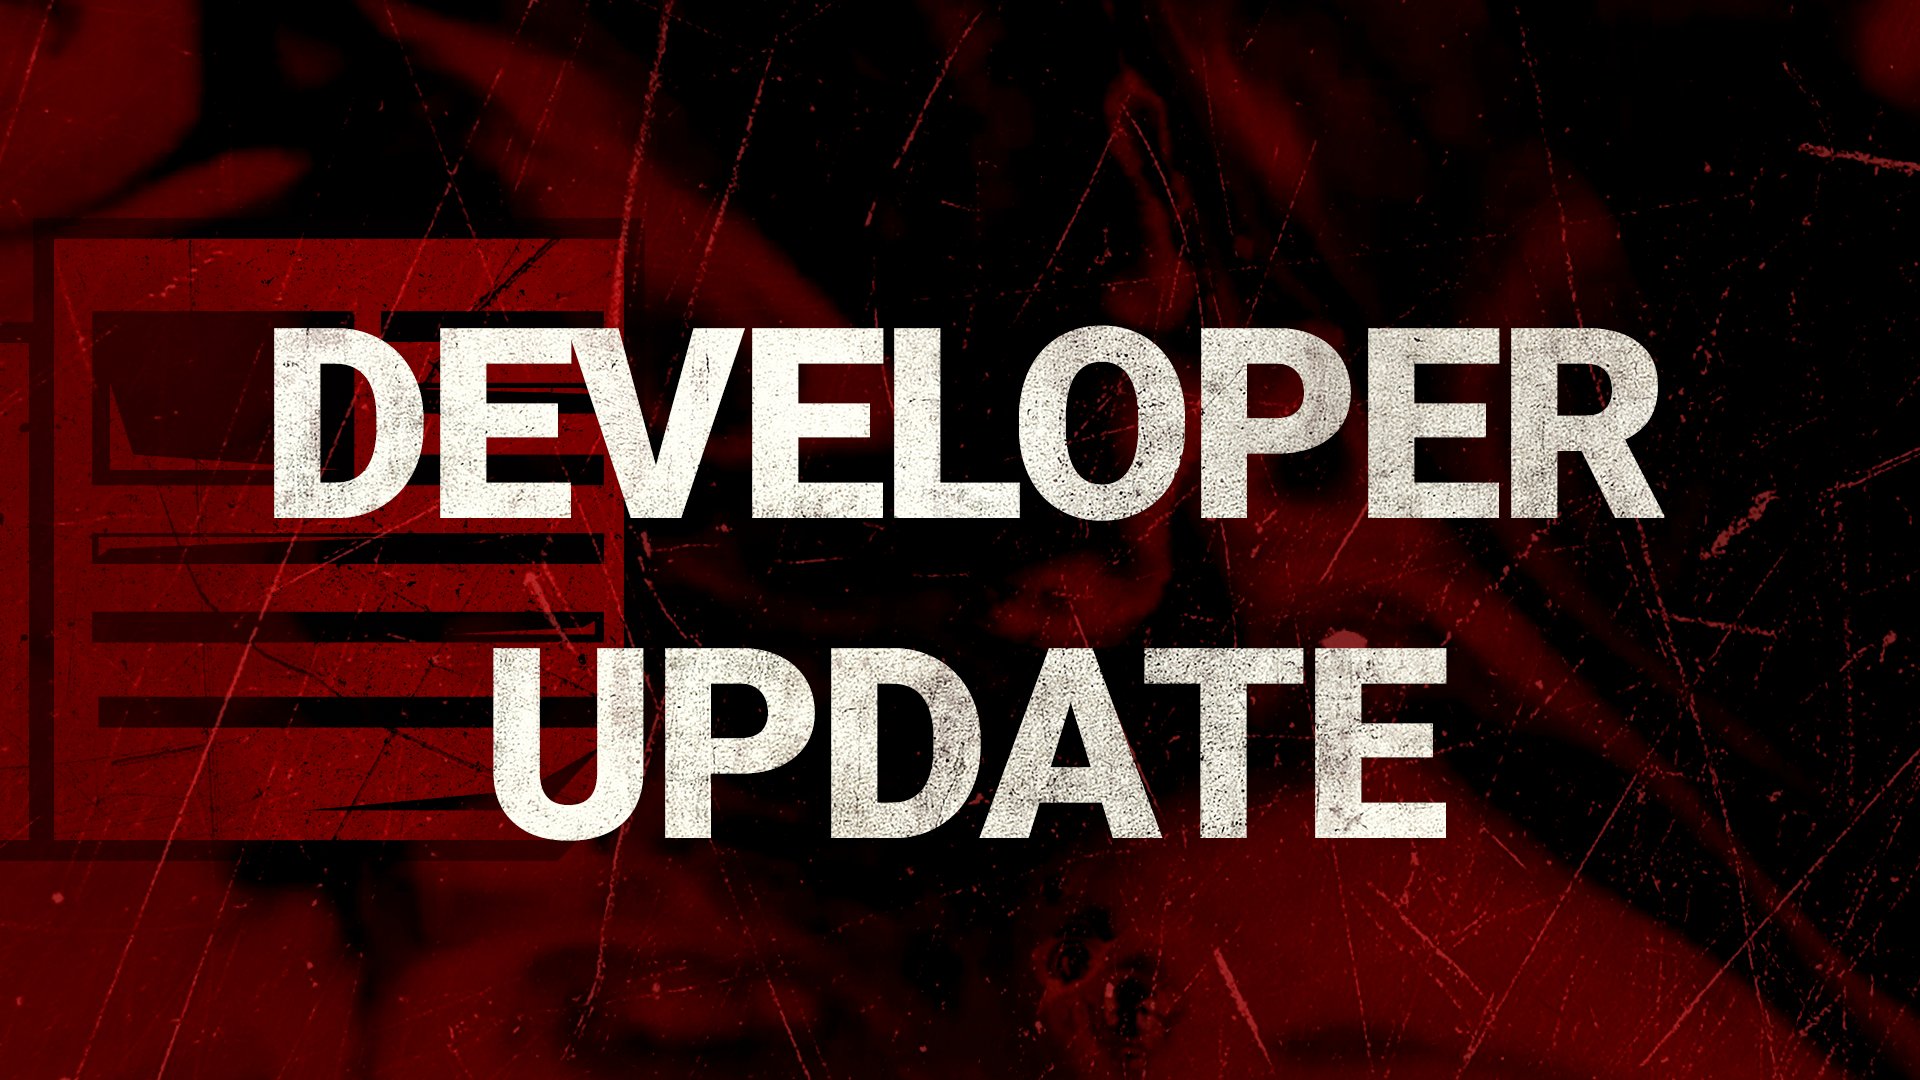 Dead By Daylight What Better Way To End The Week Than With A Developer Update Click The Link To Read Or Watch All The Changes Coming With The Next Update